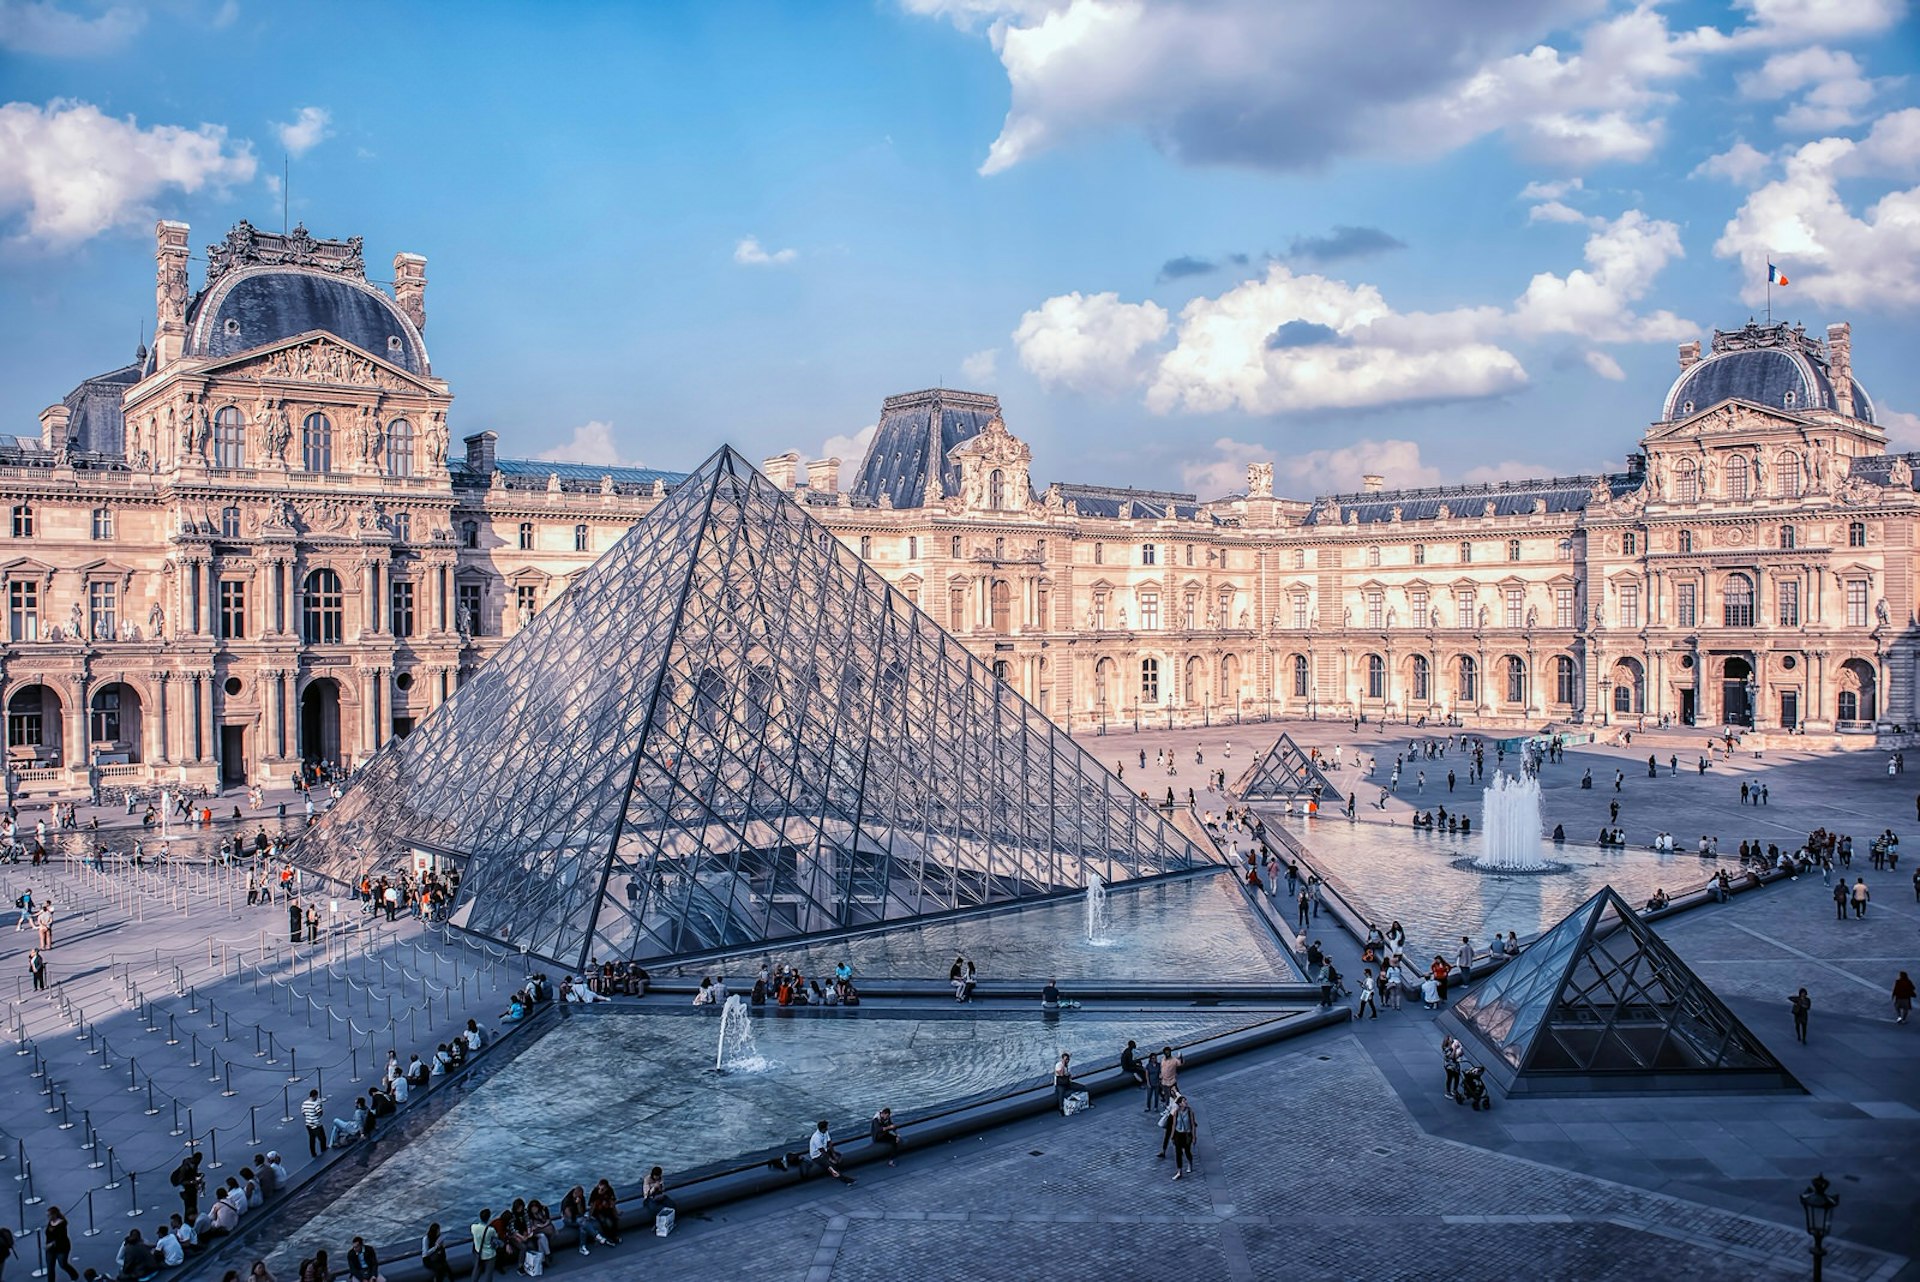 Large glass pyramid that serves as the entrance to the Louvre in Paris, France